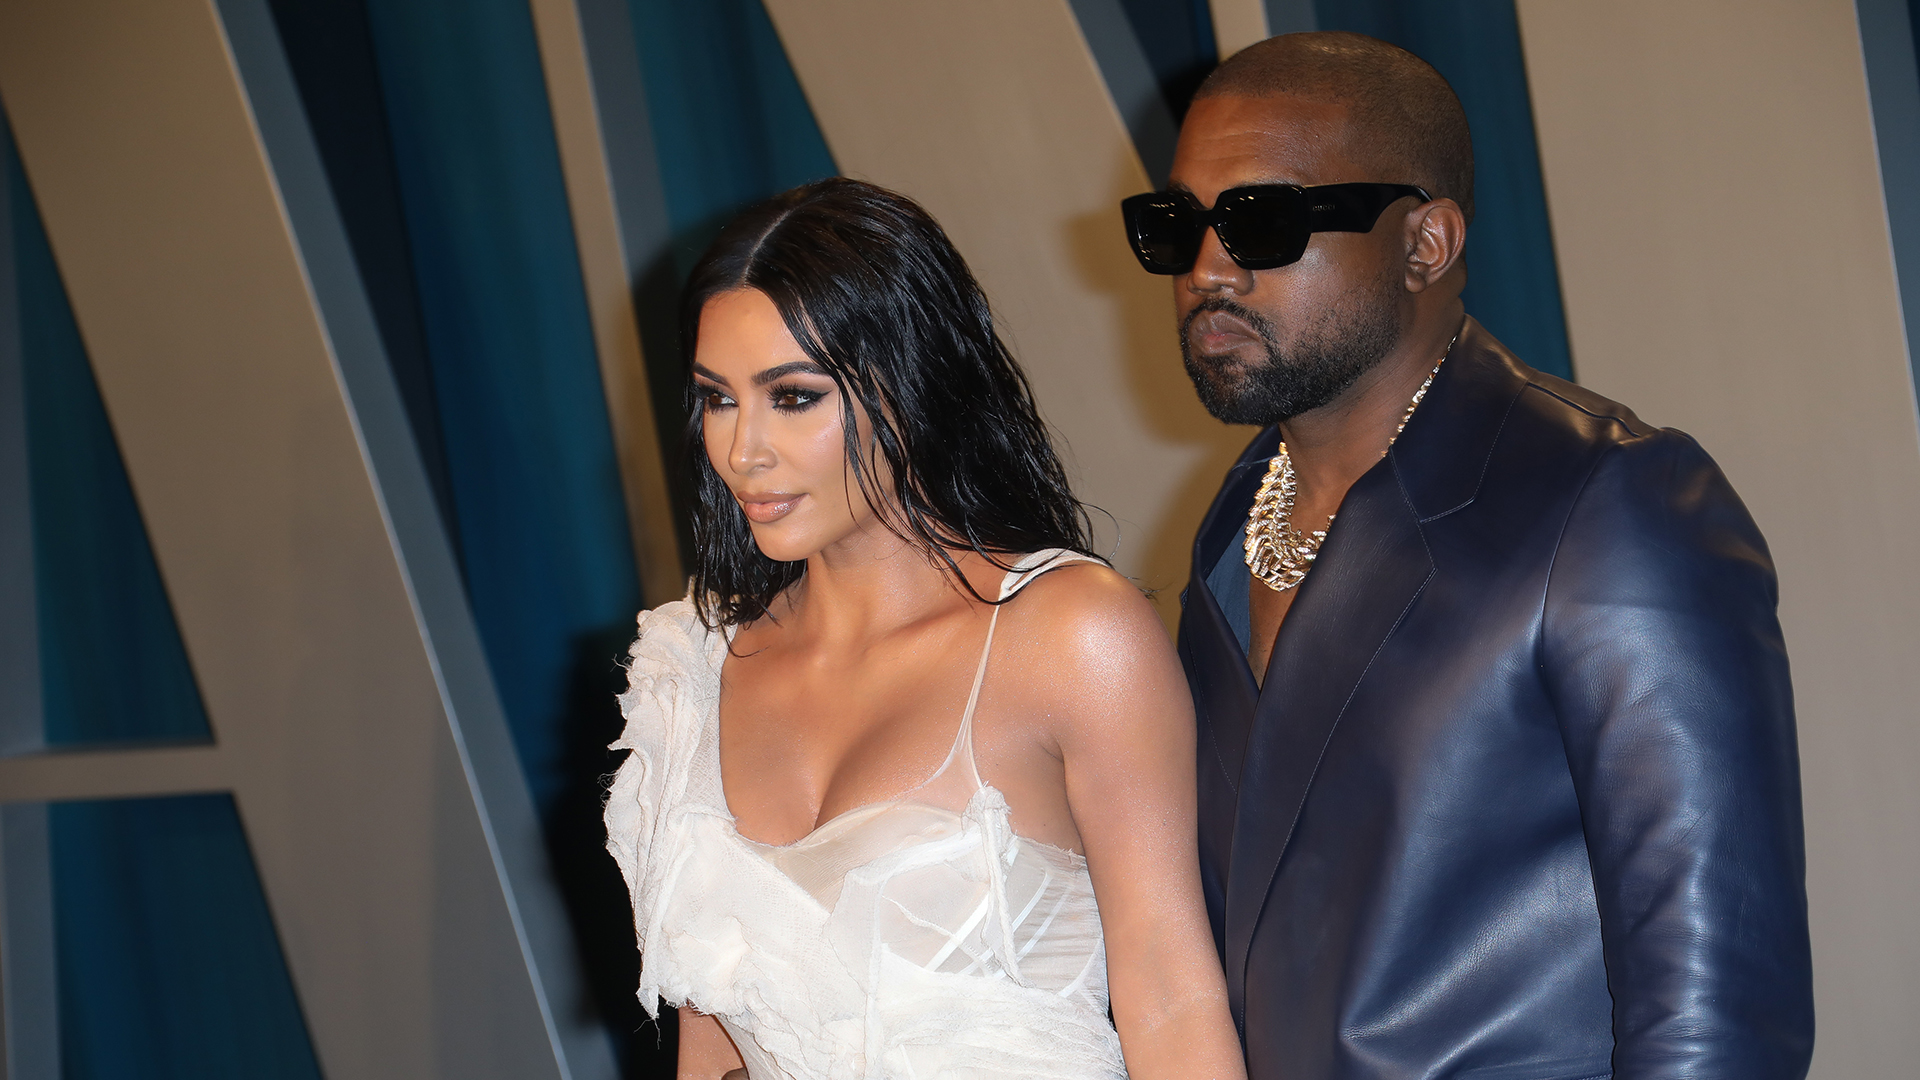 Kim Kardashian and Kanye West's Marriage Will Reportedly Be Discussed on 'KUWTK'